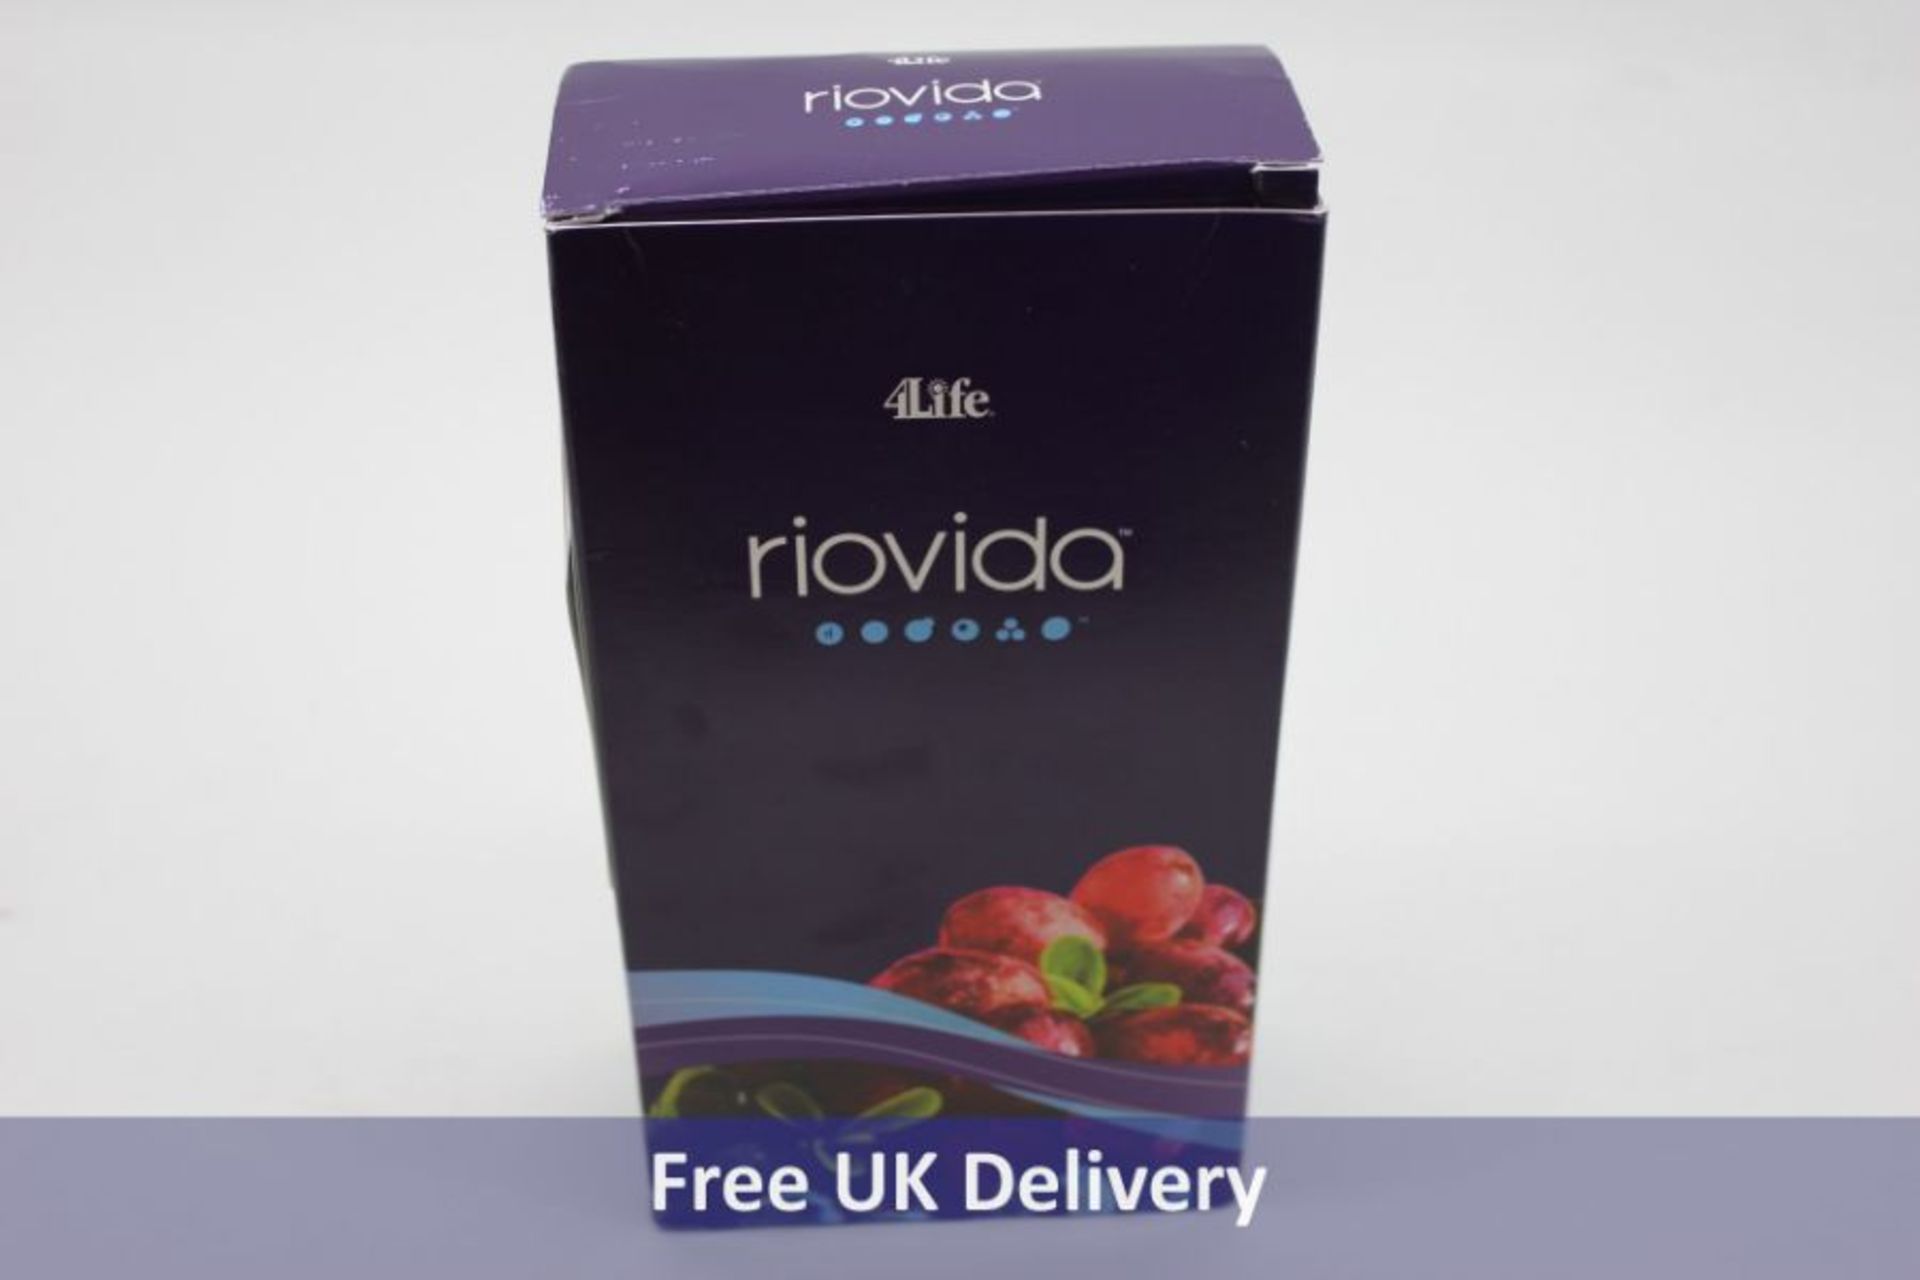 Two Bottles 4Life Riovida Food Supplement Juice with Tri-Factor Formula, 500ml each